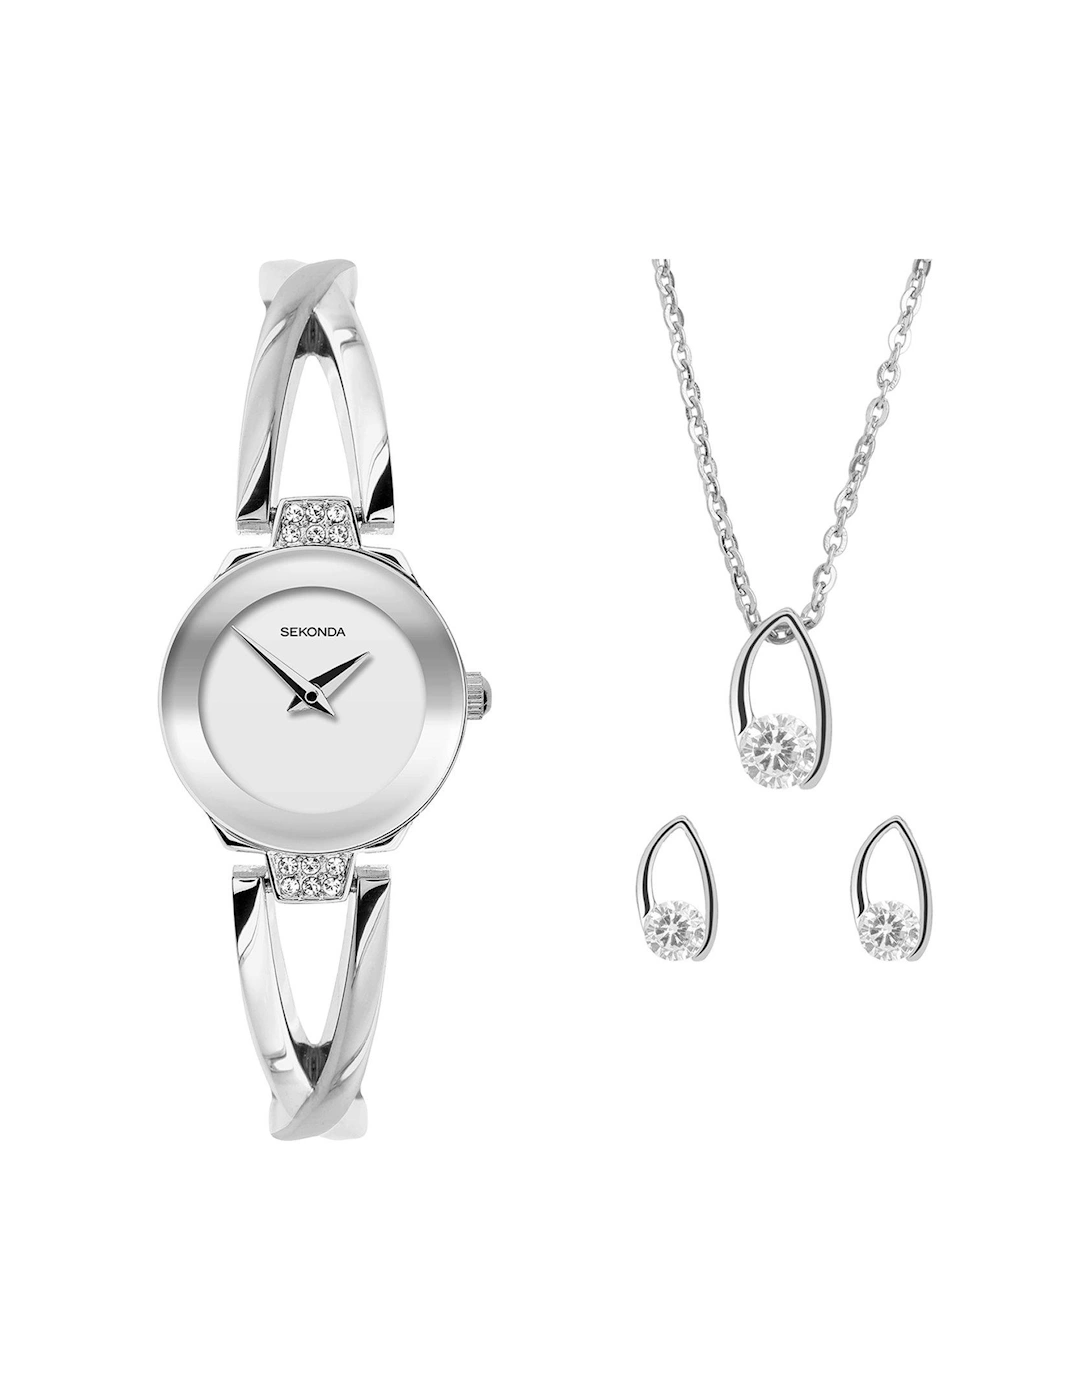 Womens Silver Alloy Semi-Bangle with Silver White Dial Analogue Watch and Matching Pendant and Earrings Gift Set, 2 of 1